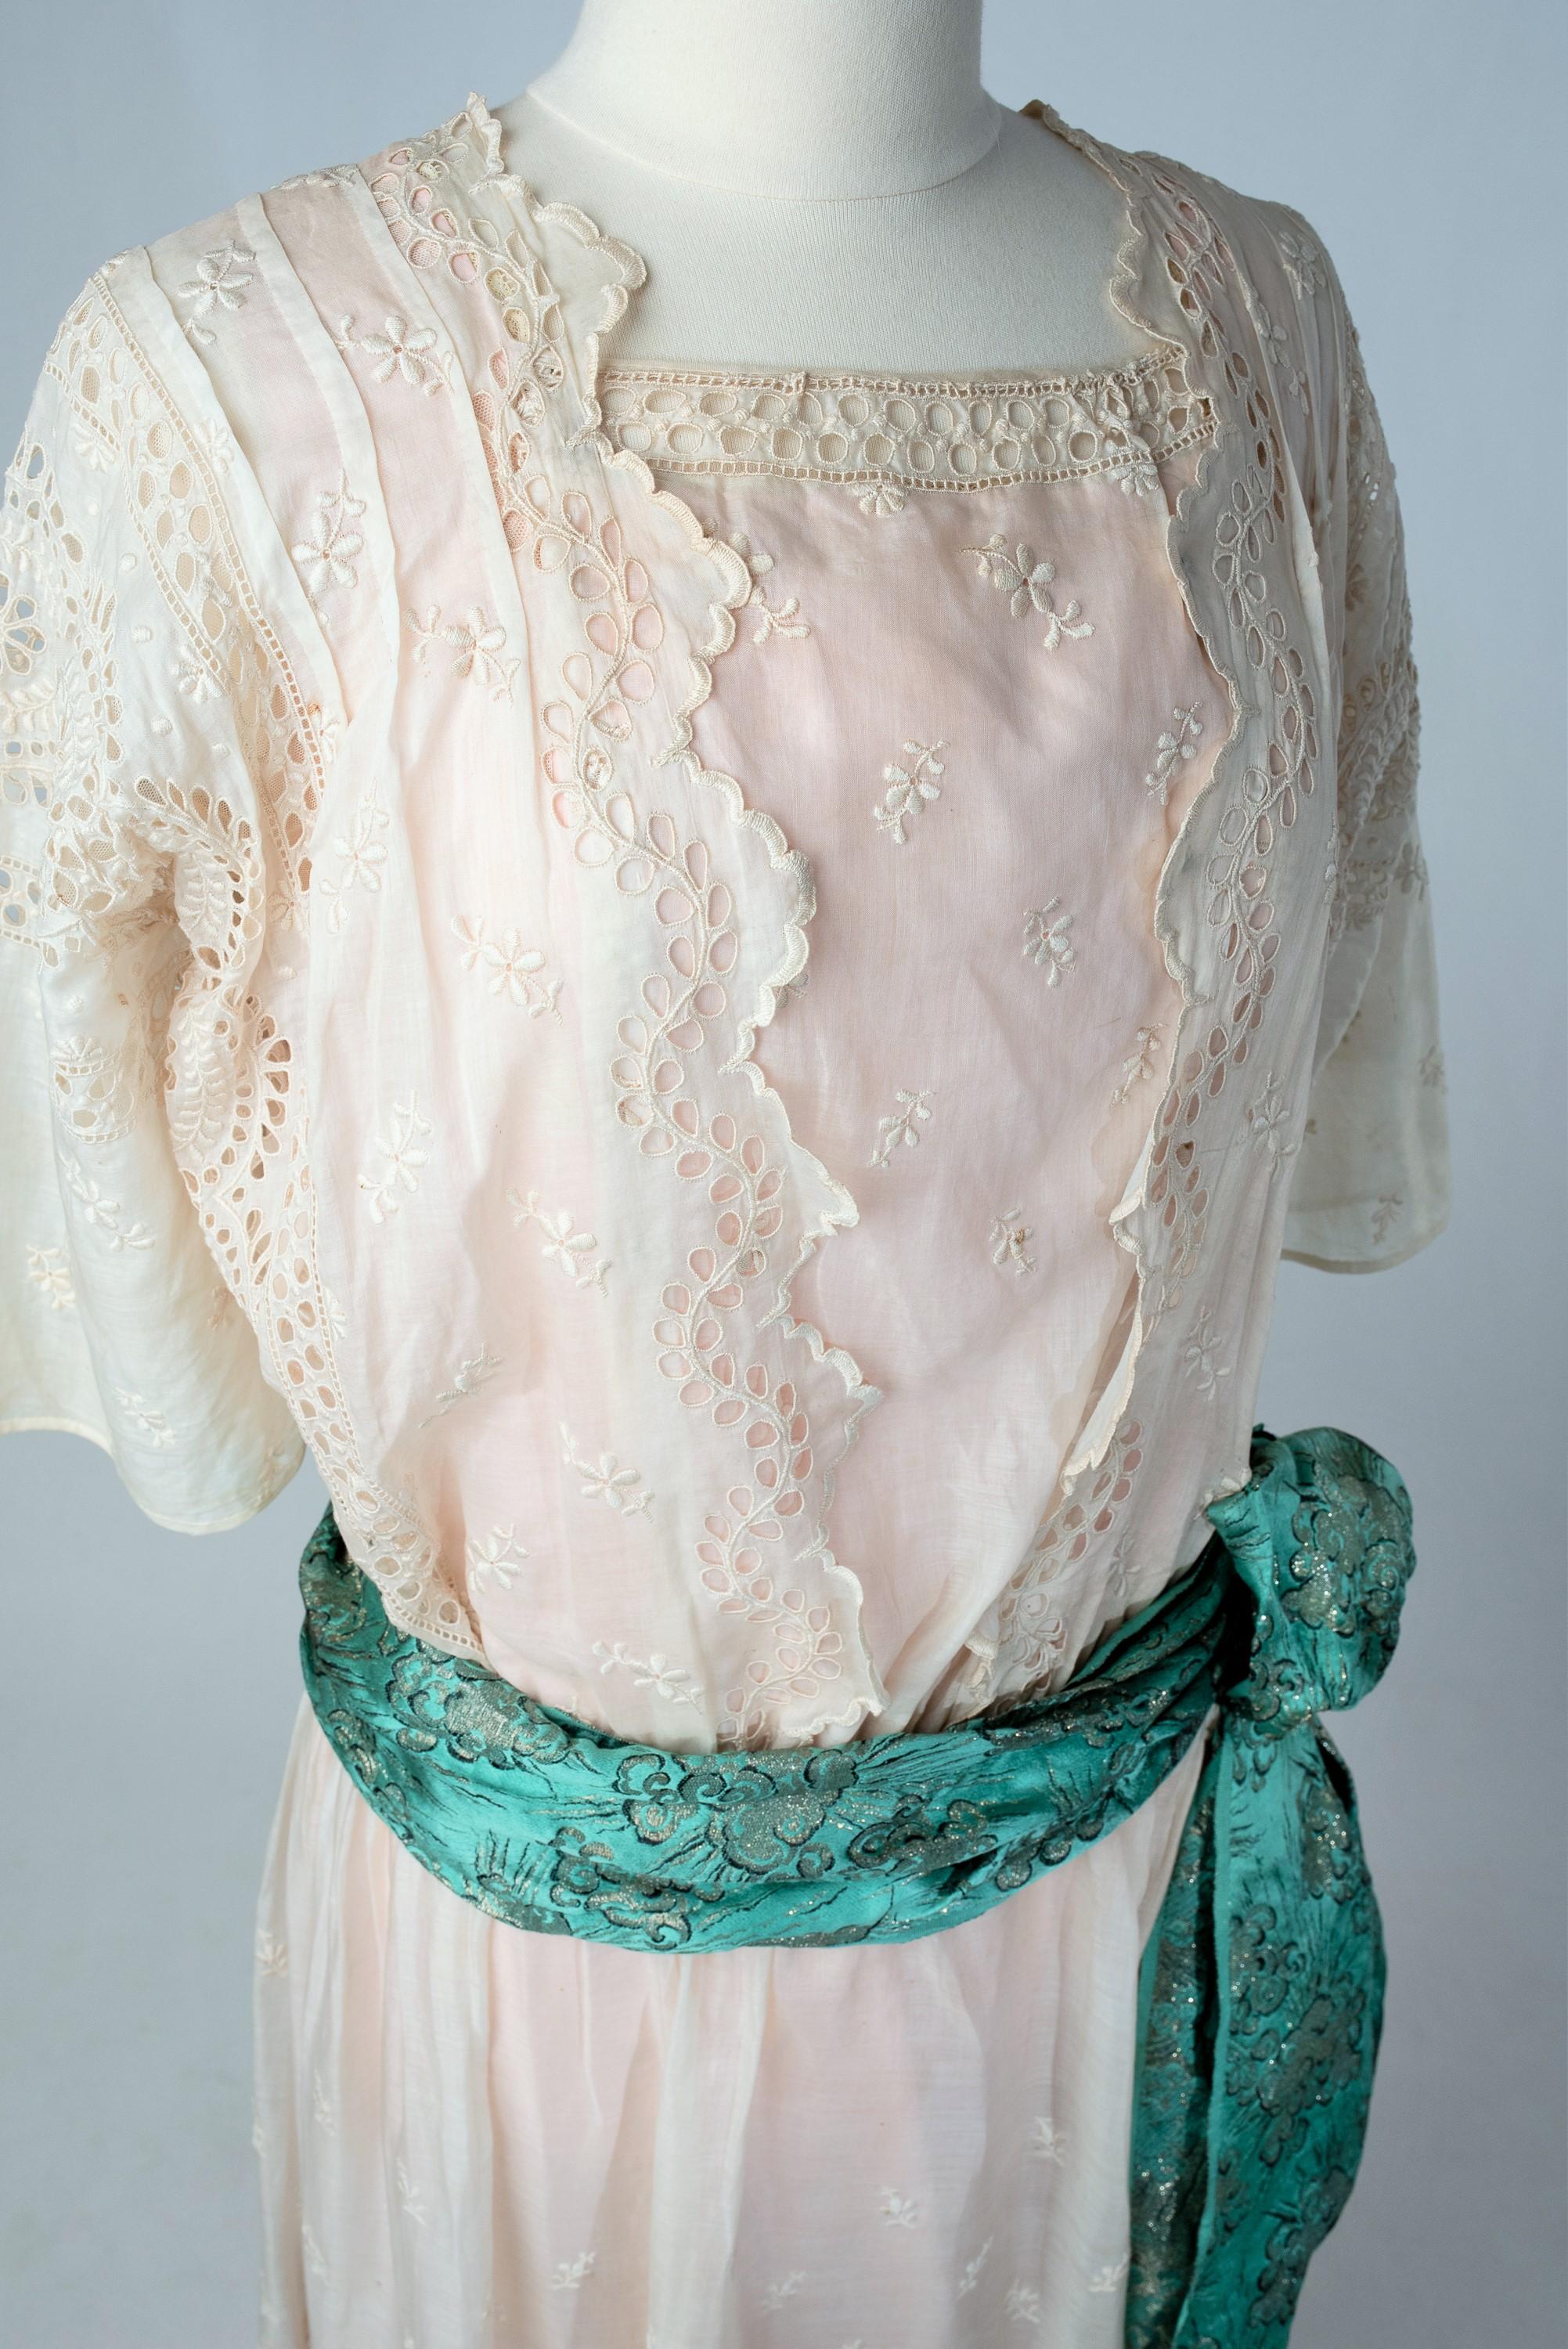 Circa 1918 - 1922
France

Beautiful seaside resort dress for the seaside or the spa in Vichy ! Superb work of broderies anglaise on chiffon silk or ecru silk pongee playing with the transparency of the light pink silk pongee underdress. Straight bag